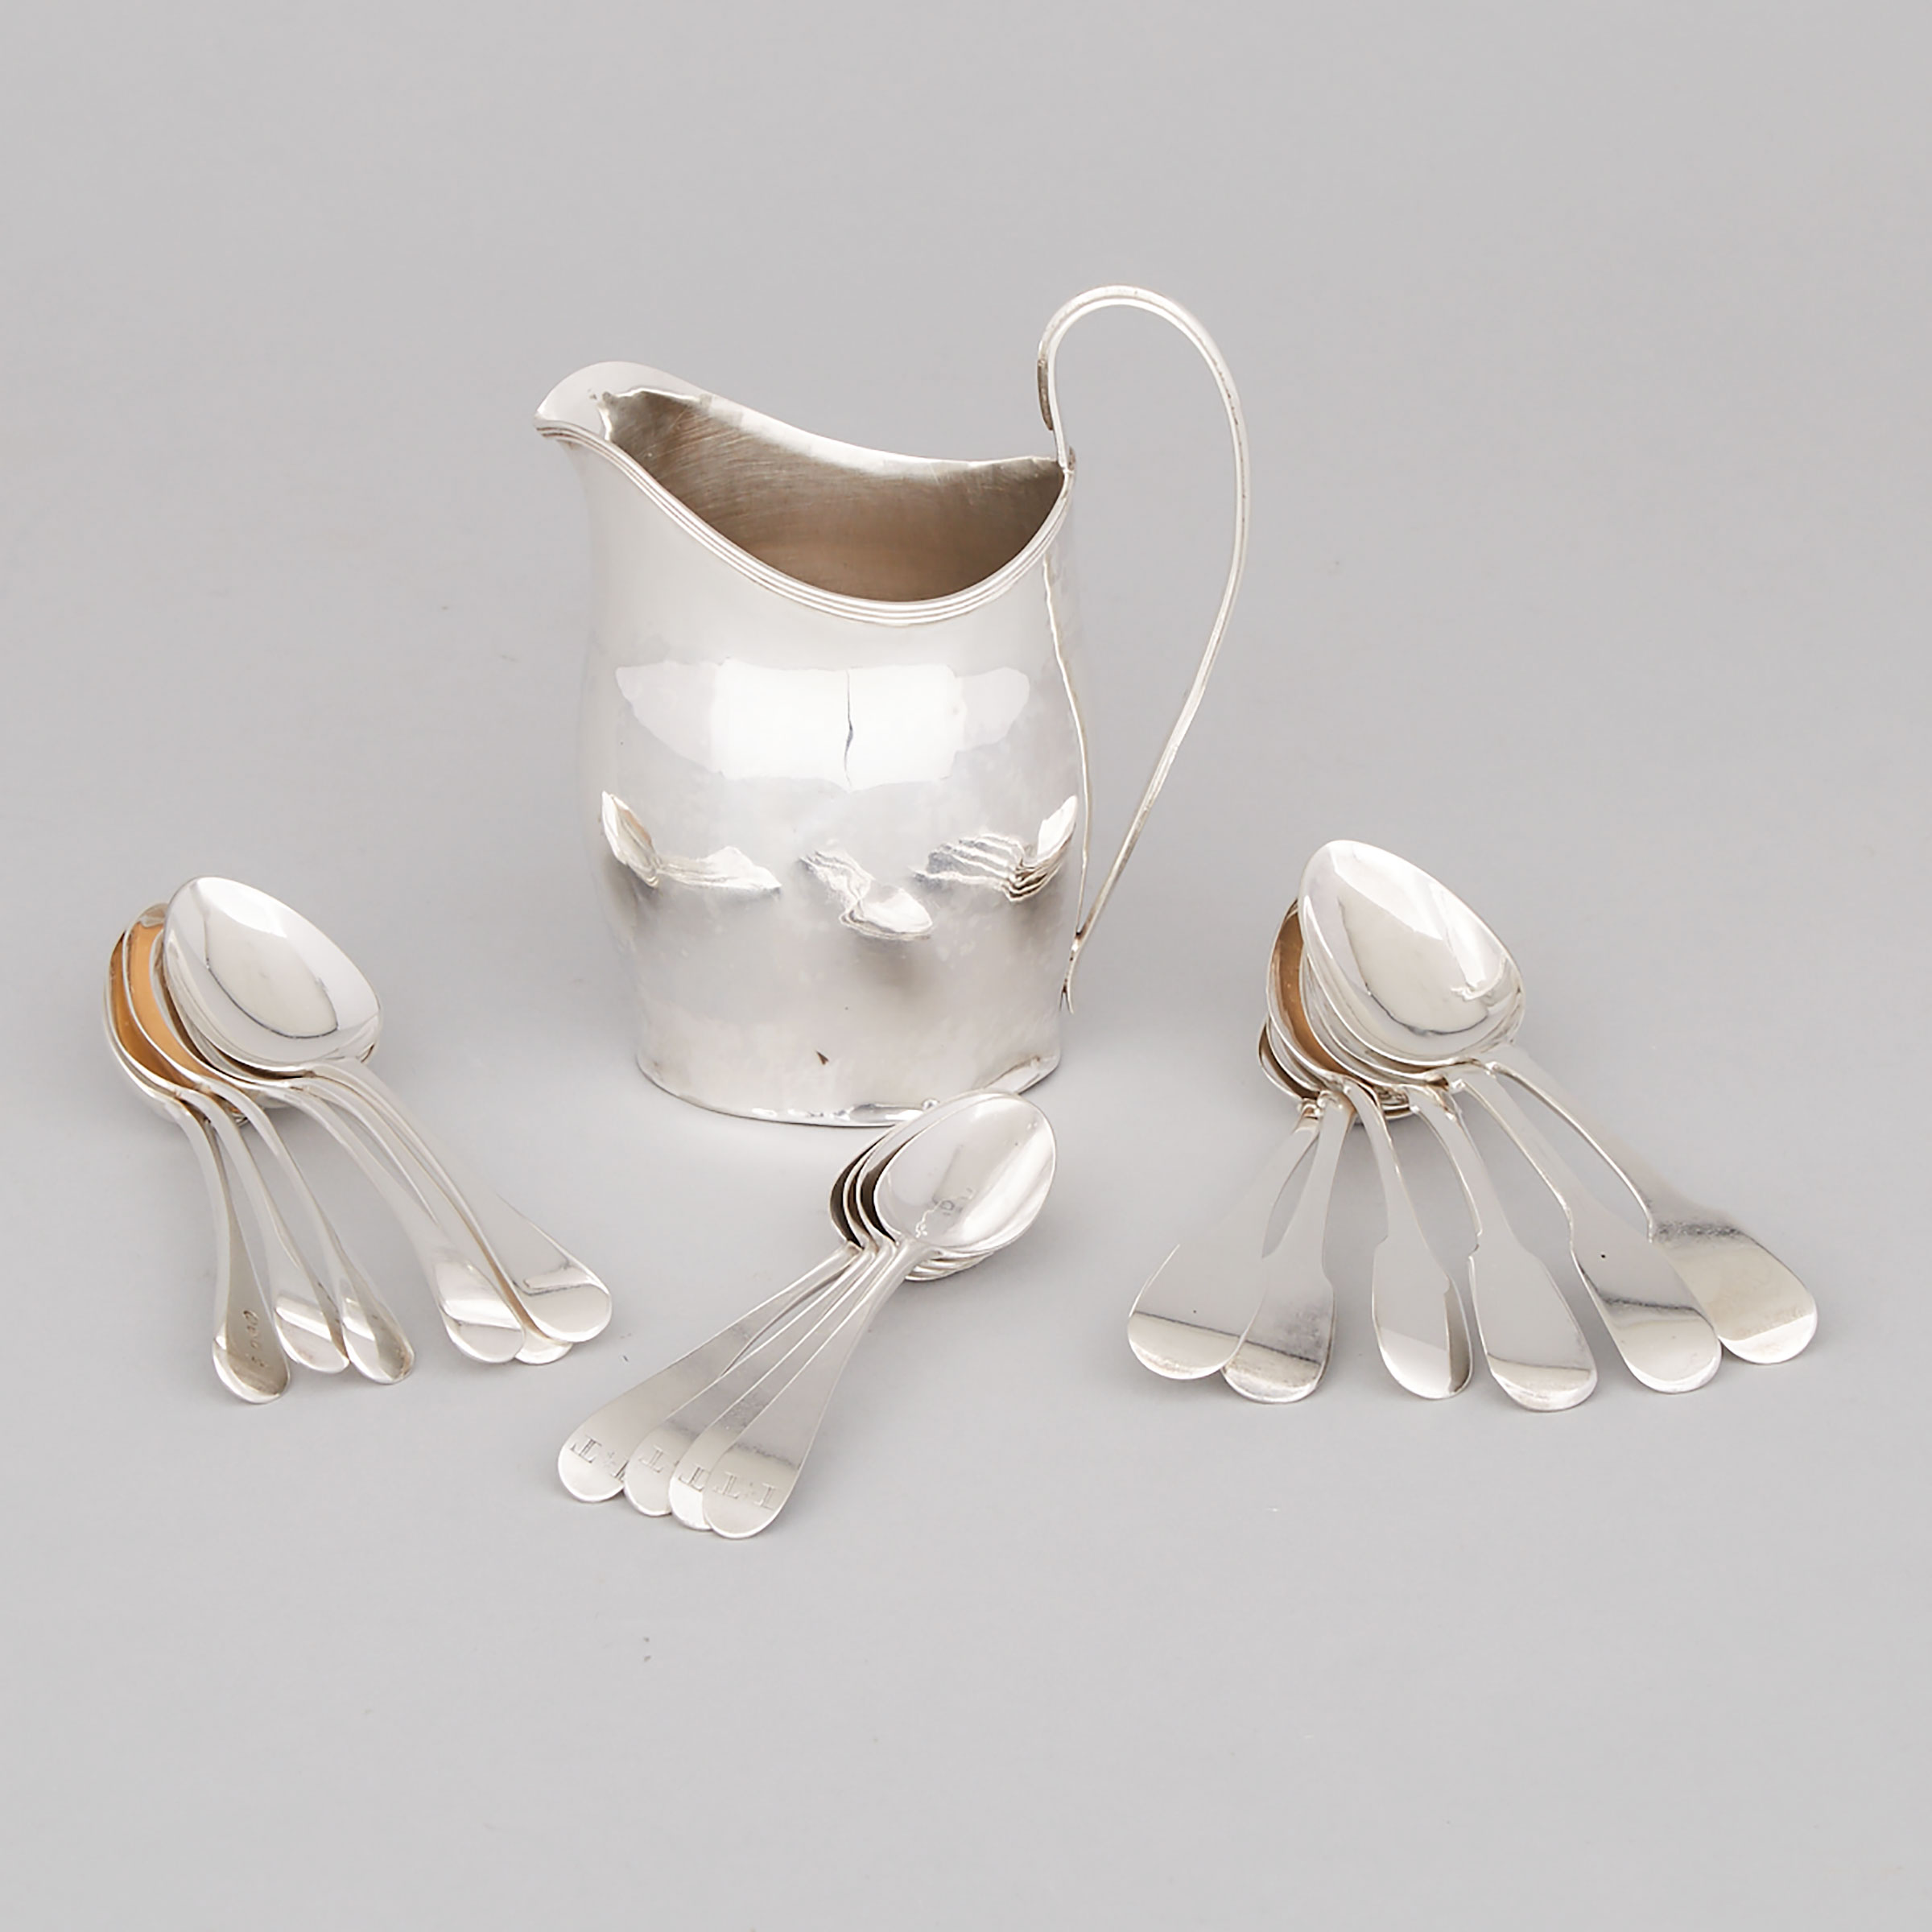 George III Silver Cream Jug and Sixteen Tea Spoons, makers including Hester Bateman and Peter & Ann Bateman, London and York, late 18th/19th century 